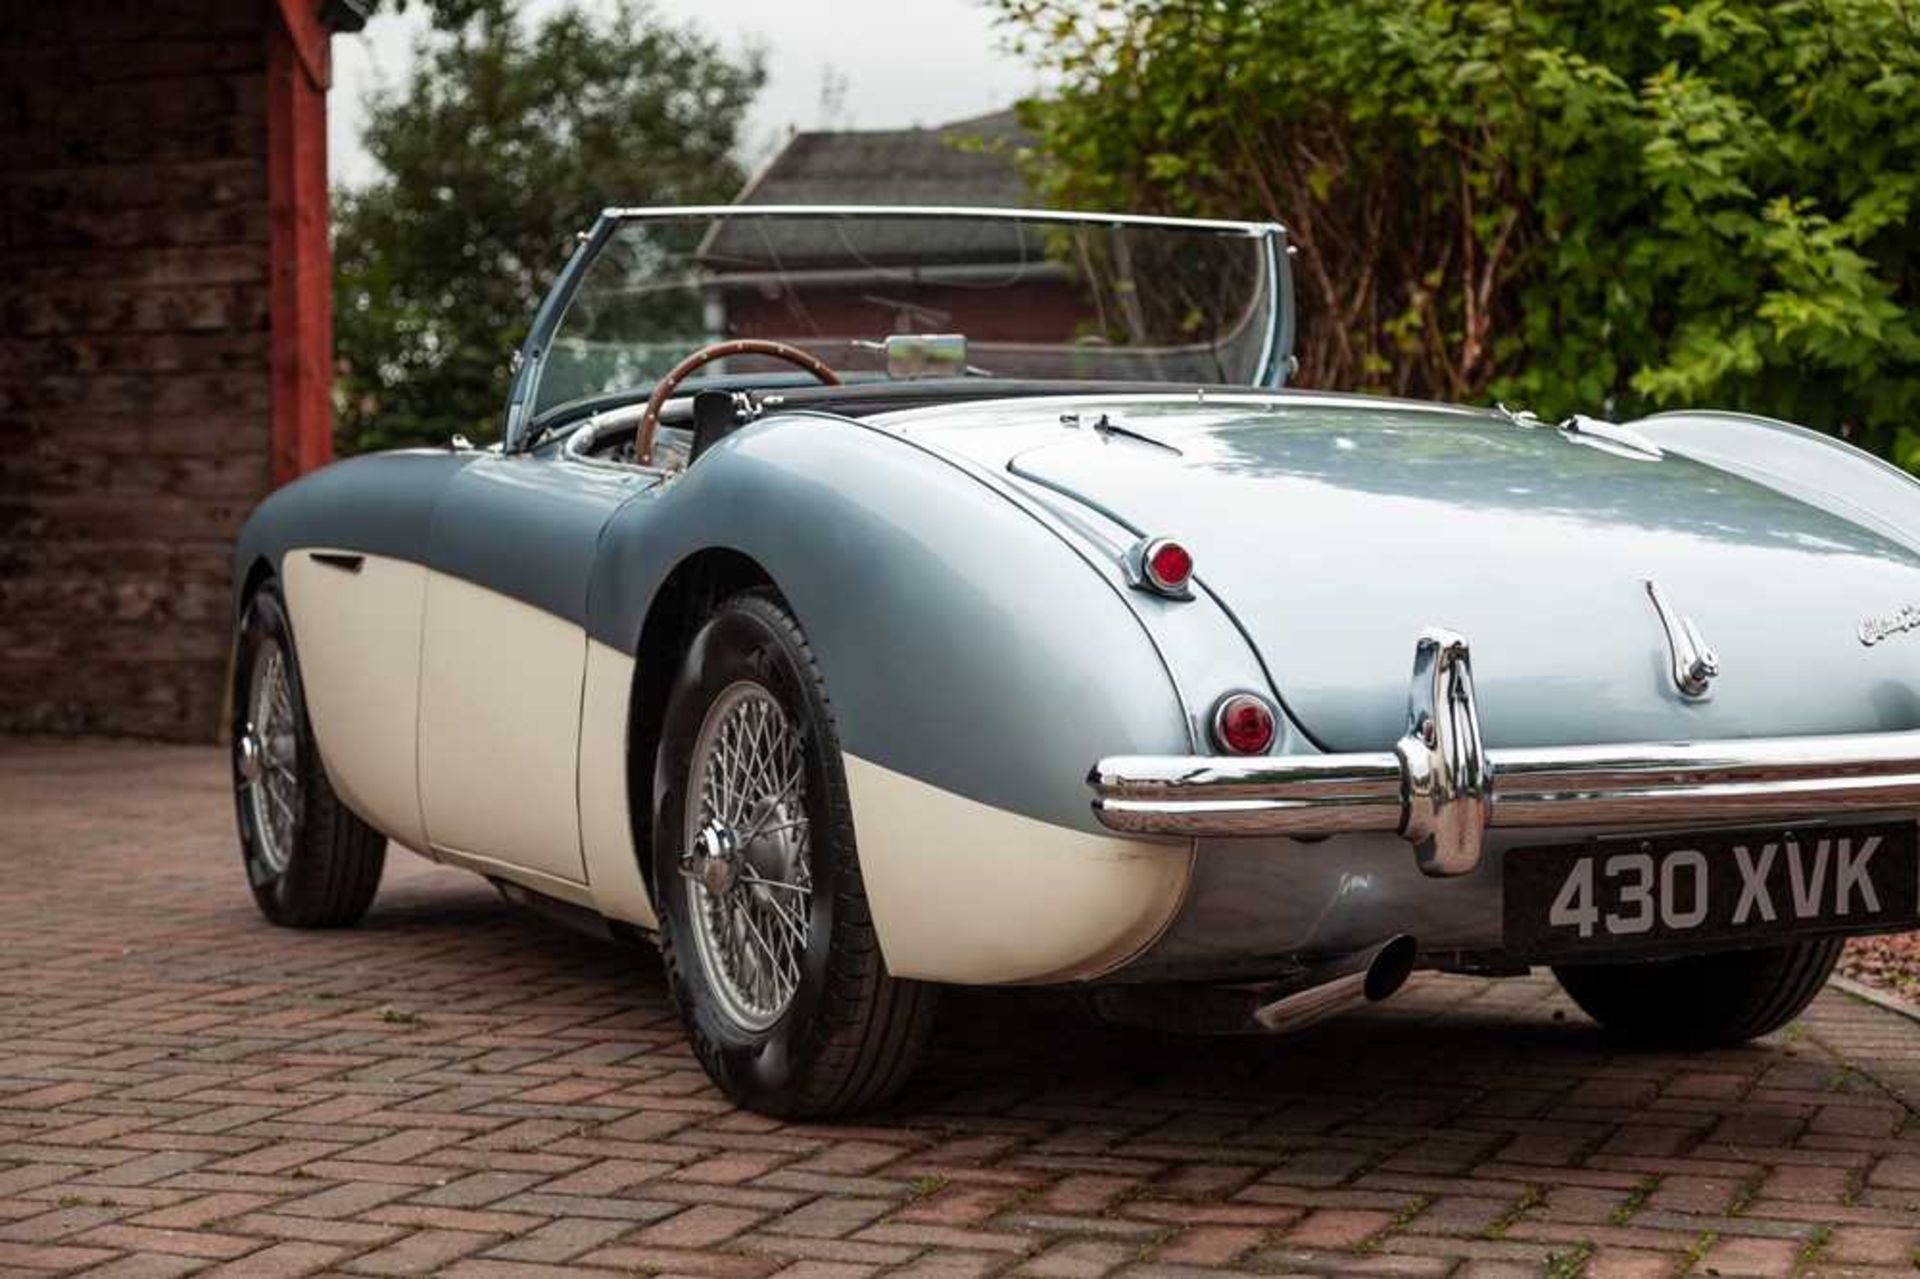 1955 Austin-Healey 100/4 Subtly Upgraded with 5-Speed Transmission and Front Disc Brakes - Image 8 of 54